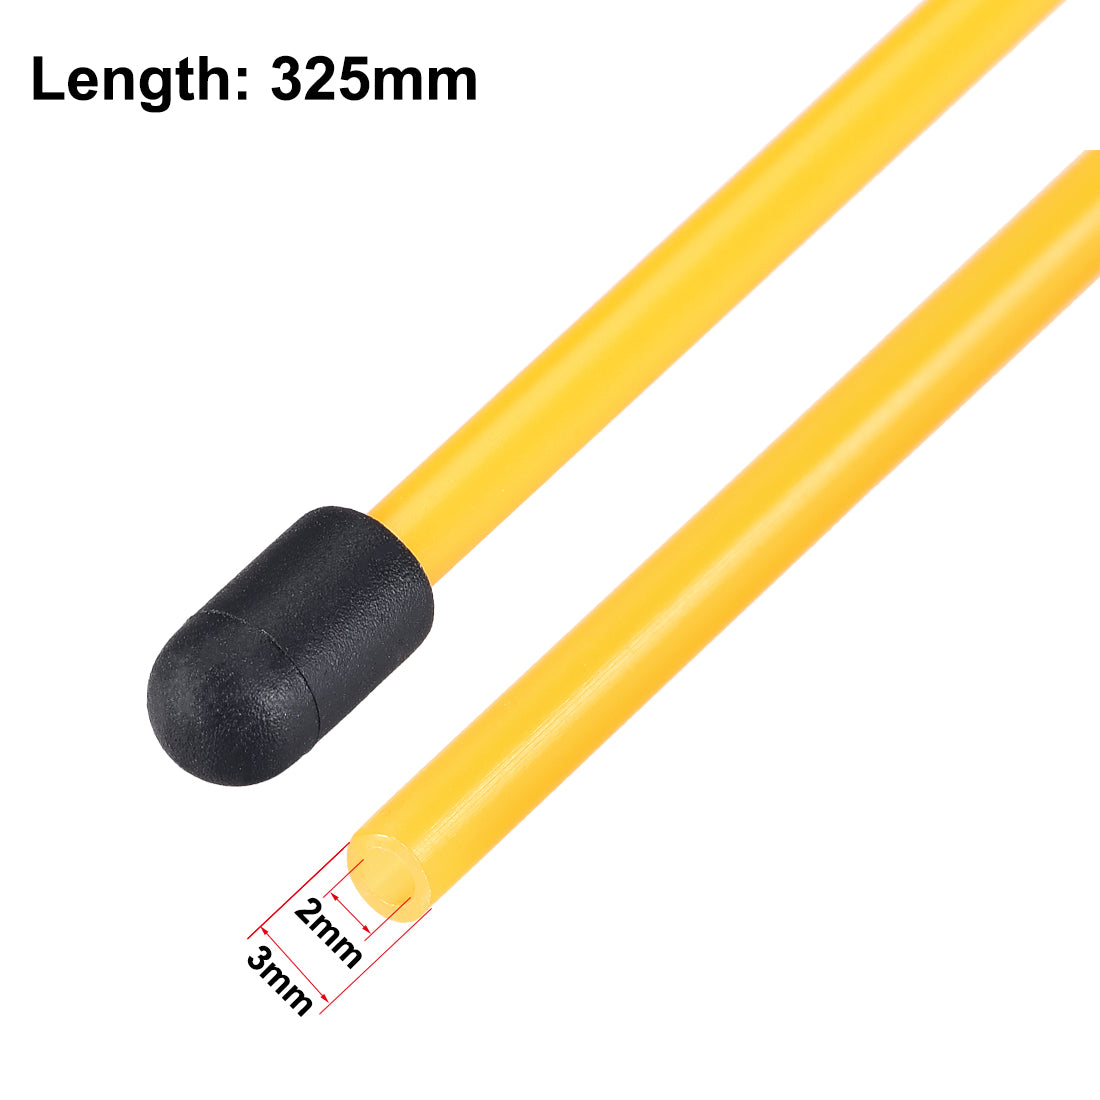 uxcell Uxcell RC Antenna Tube with Cap for RC Boat, Plastic Orange 5pcs